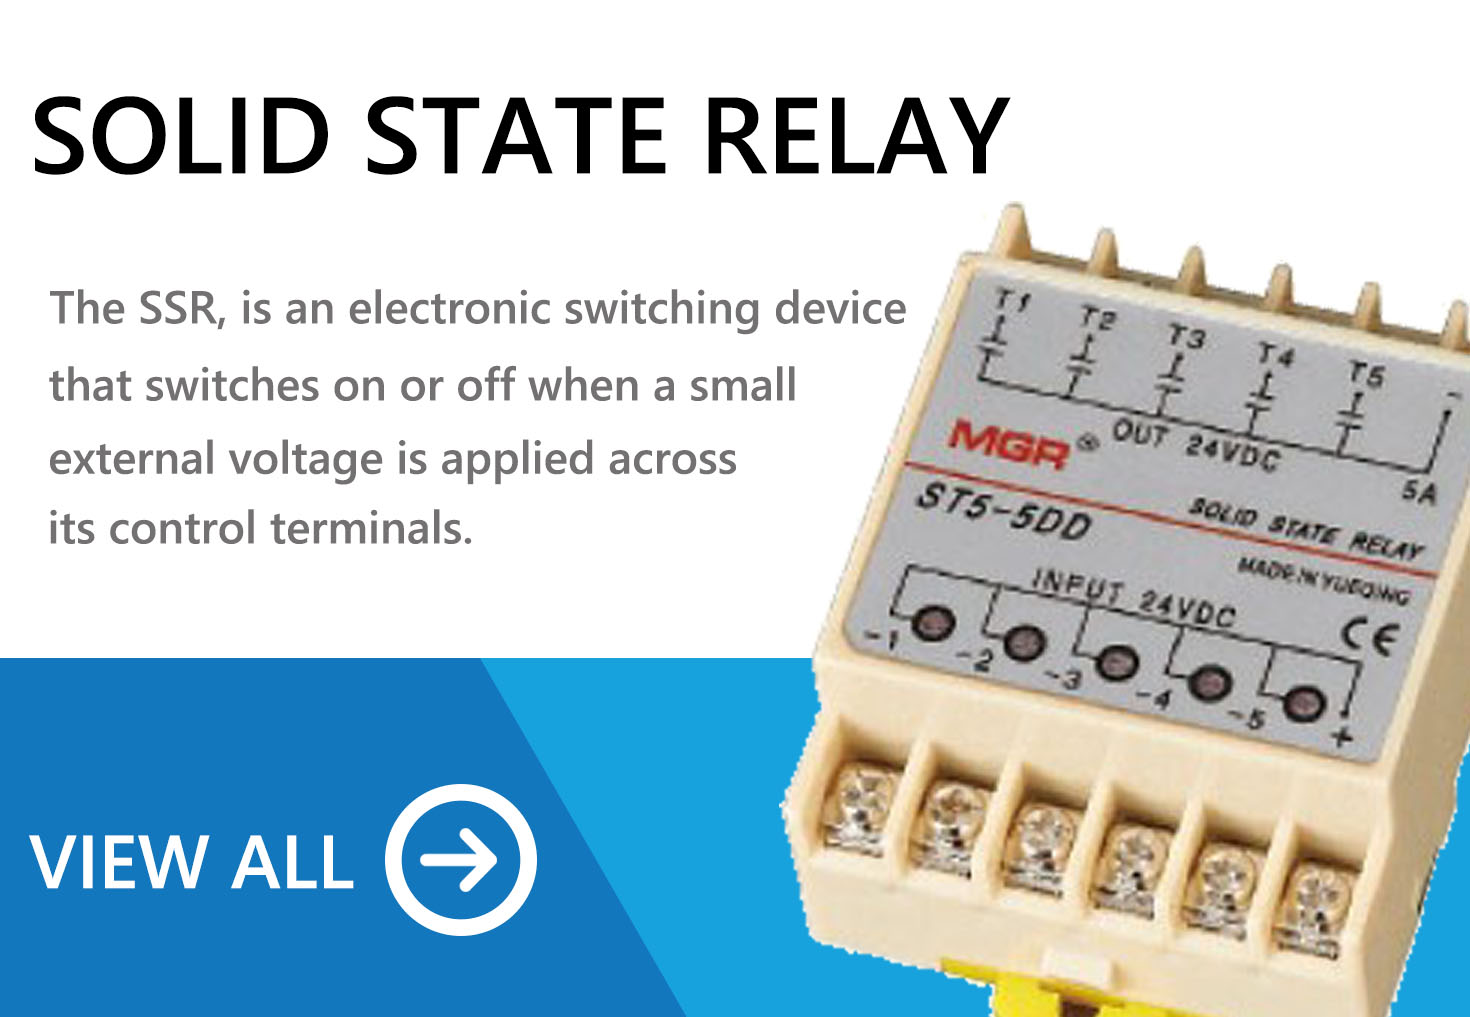 SEPCIAL SOLID STATE RELAY